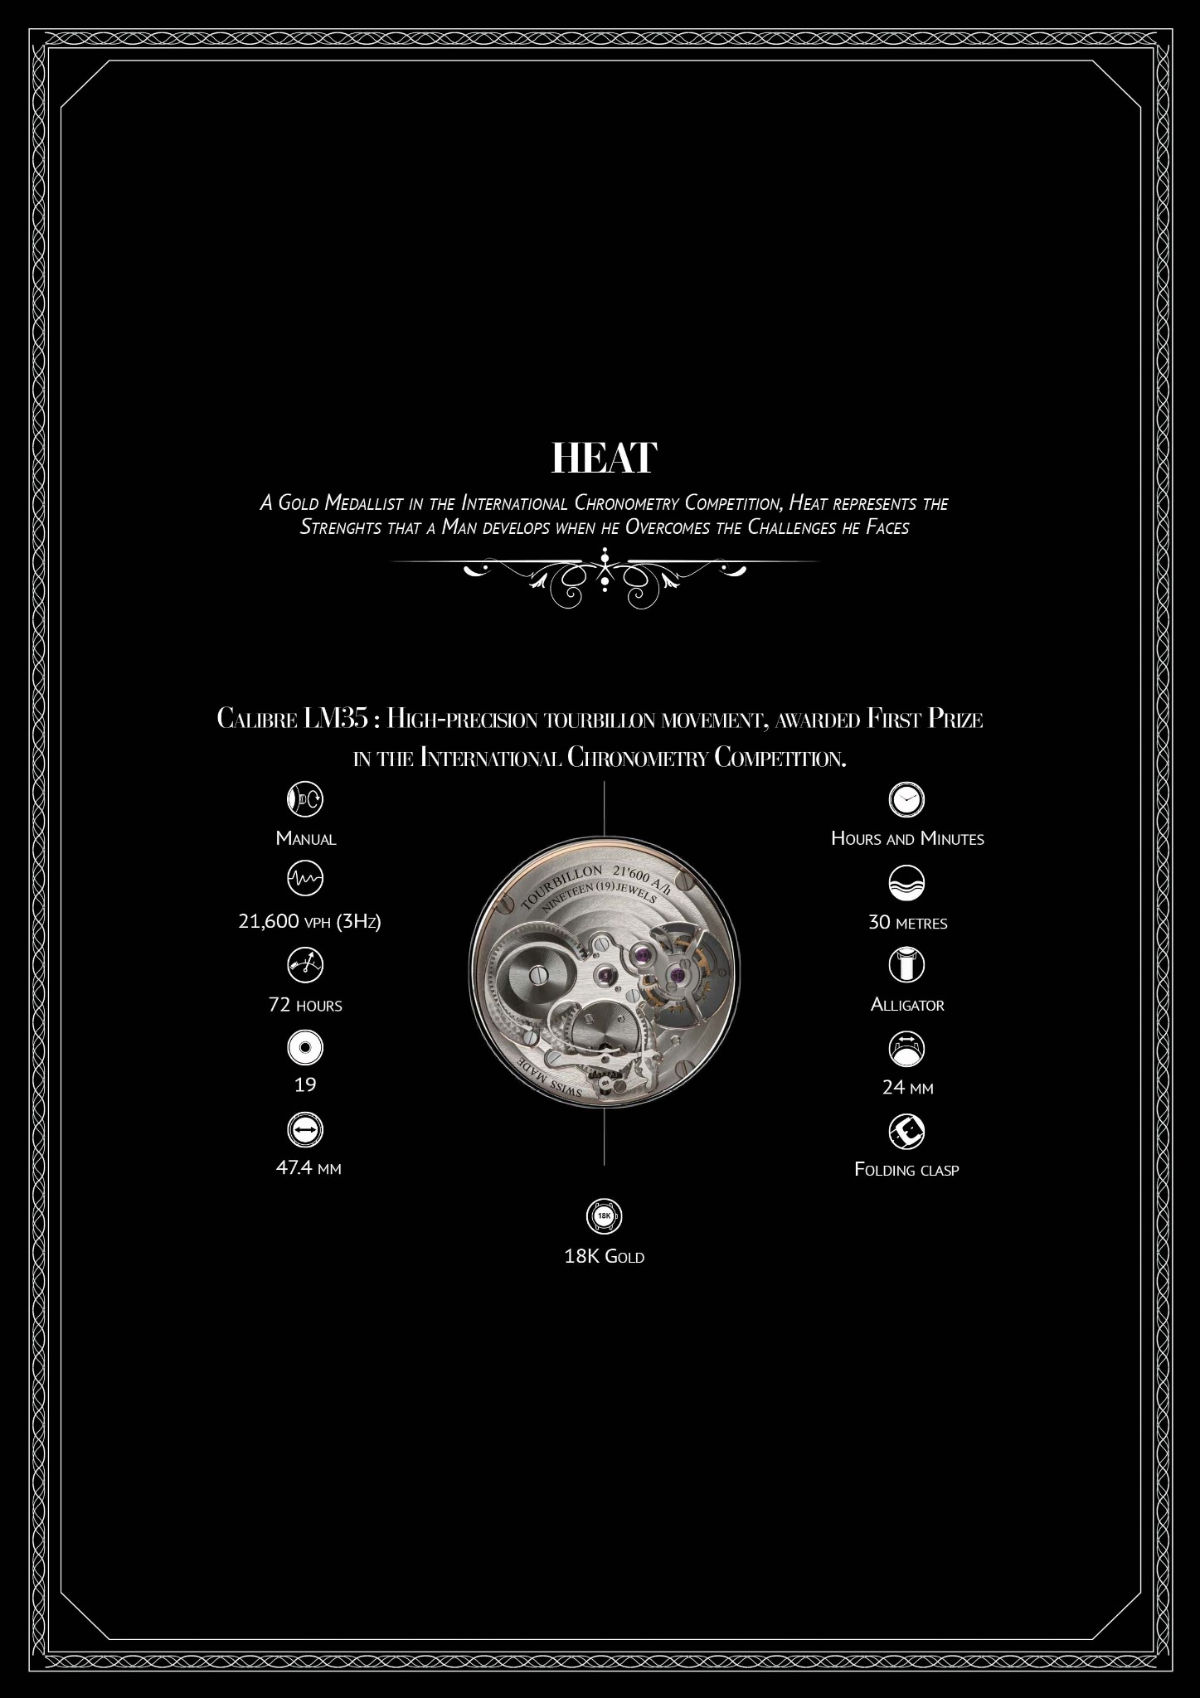 Louis Moinet's HEAT: The Conquest Of Fire